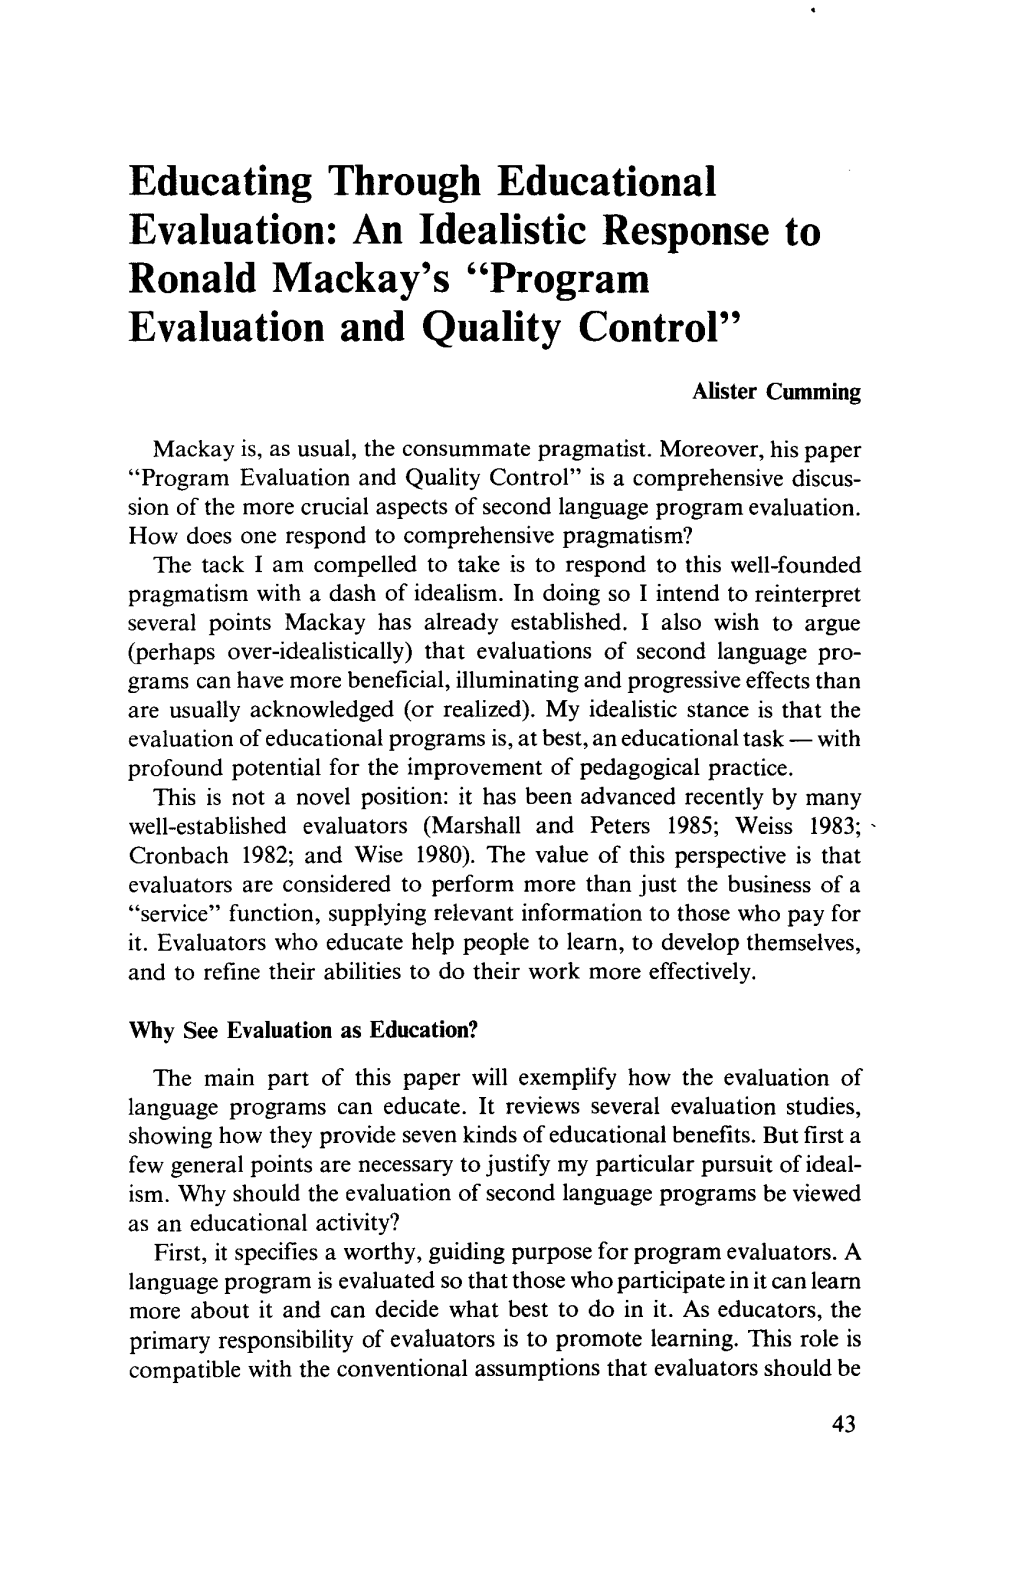 An Idealistic Response to Ronald Mackay's "Program Evaluation and Quality Control"